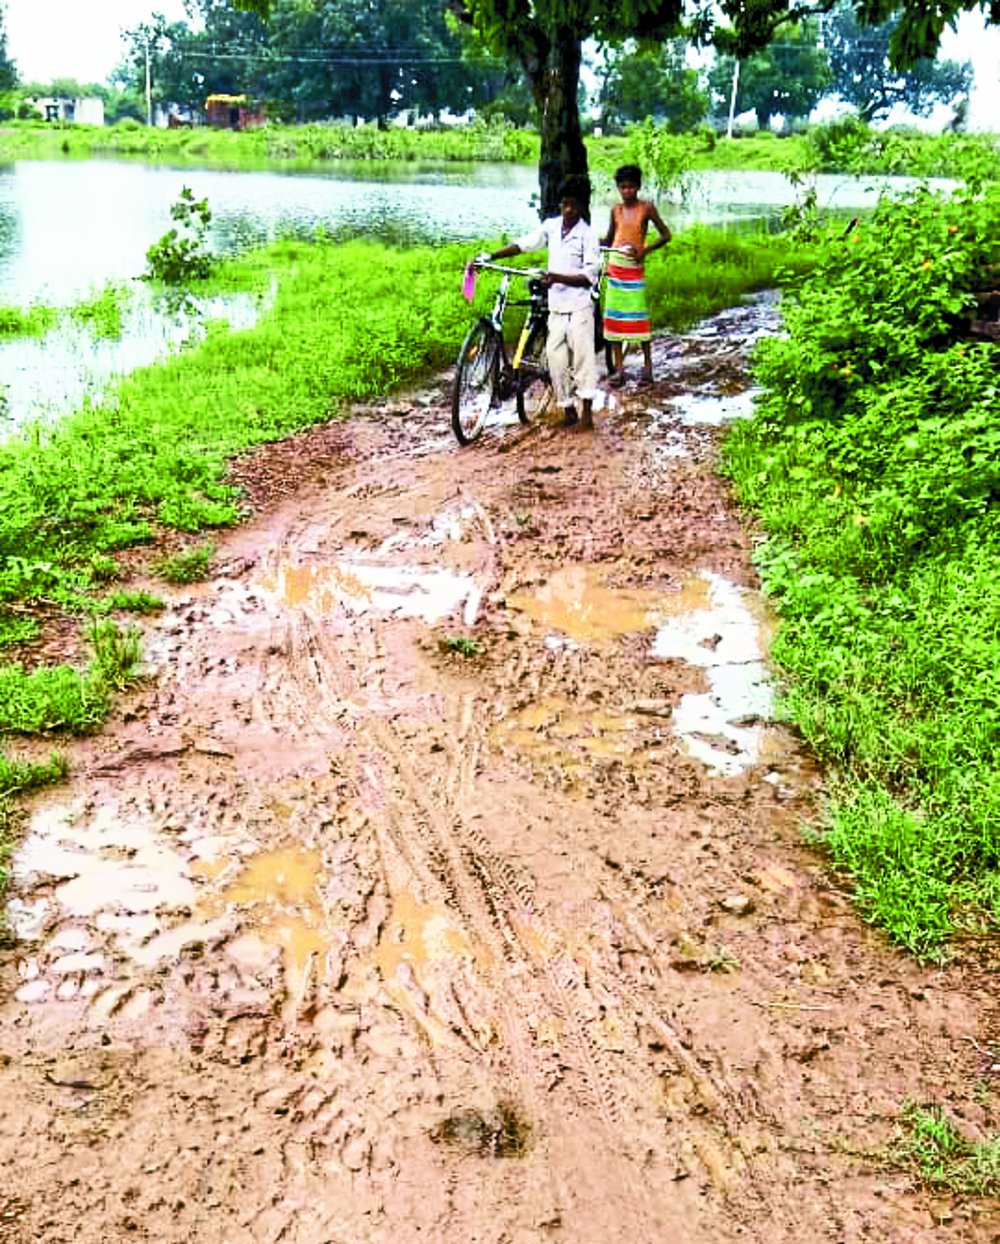 Due to lack of road in the district, the villagers were forced to pass 